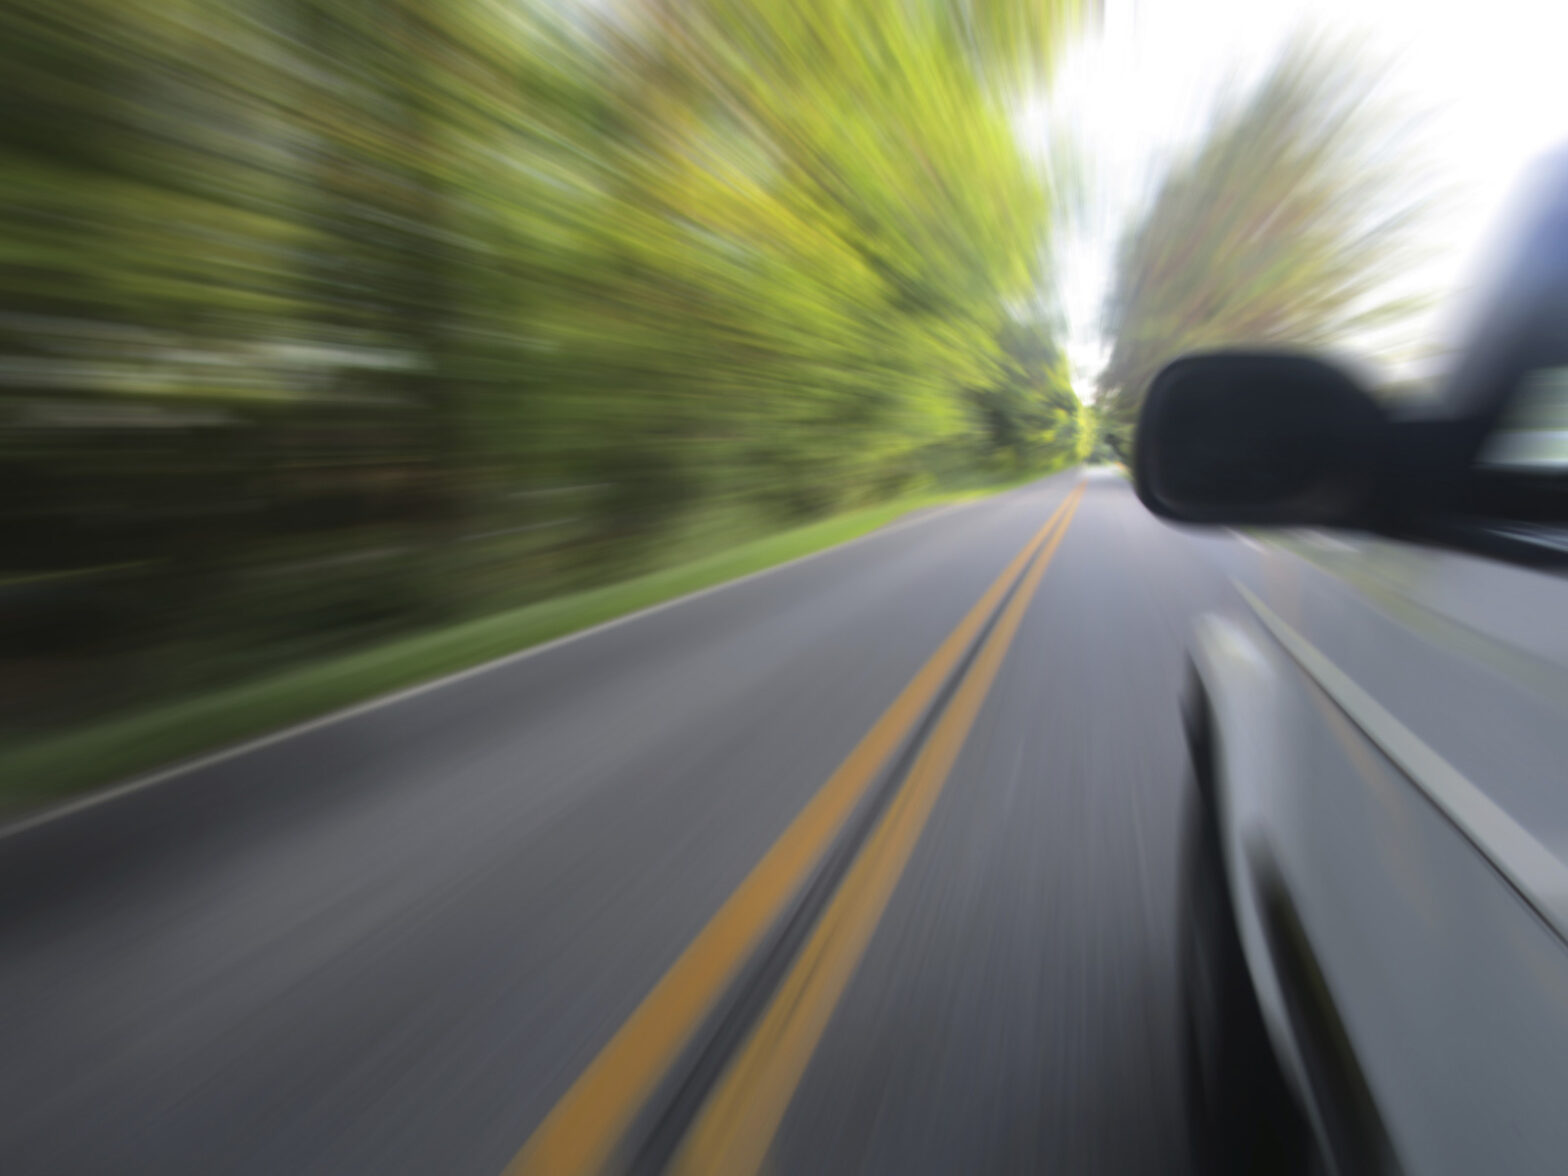 A car speeding down the road - Communicating Culture Down the Line